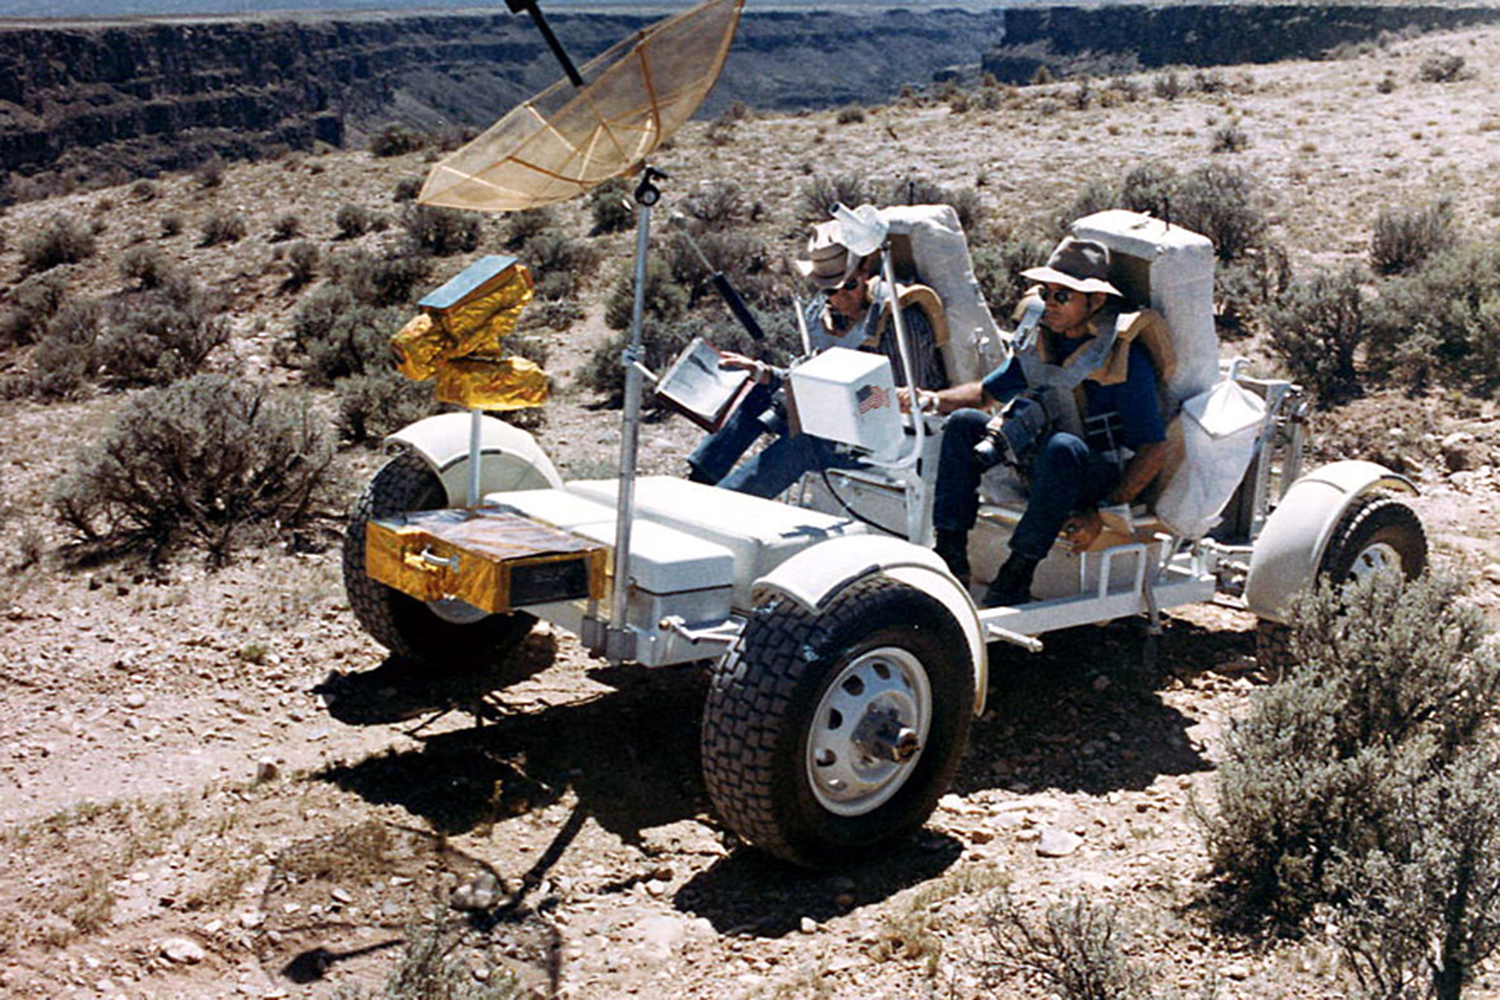 history of the moon buggy lunar roving vehicle ap16 s71 51616